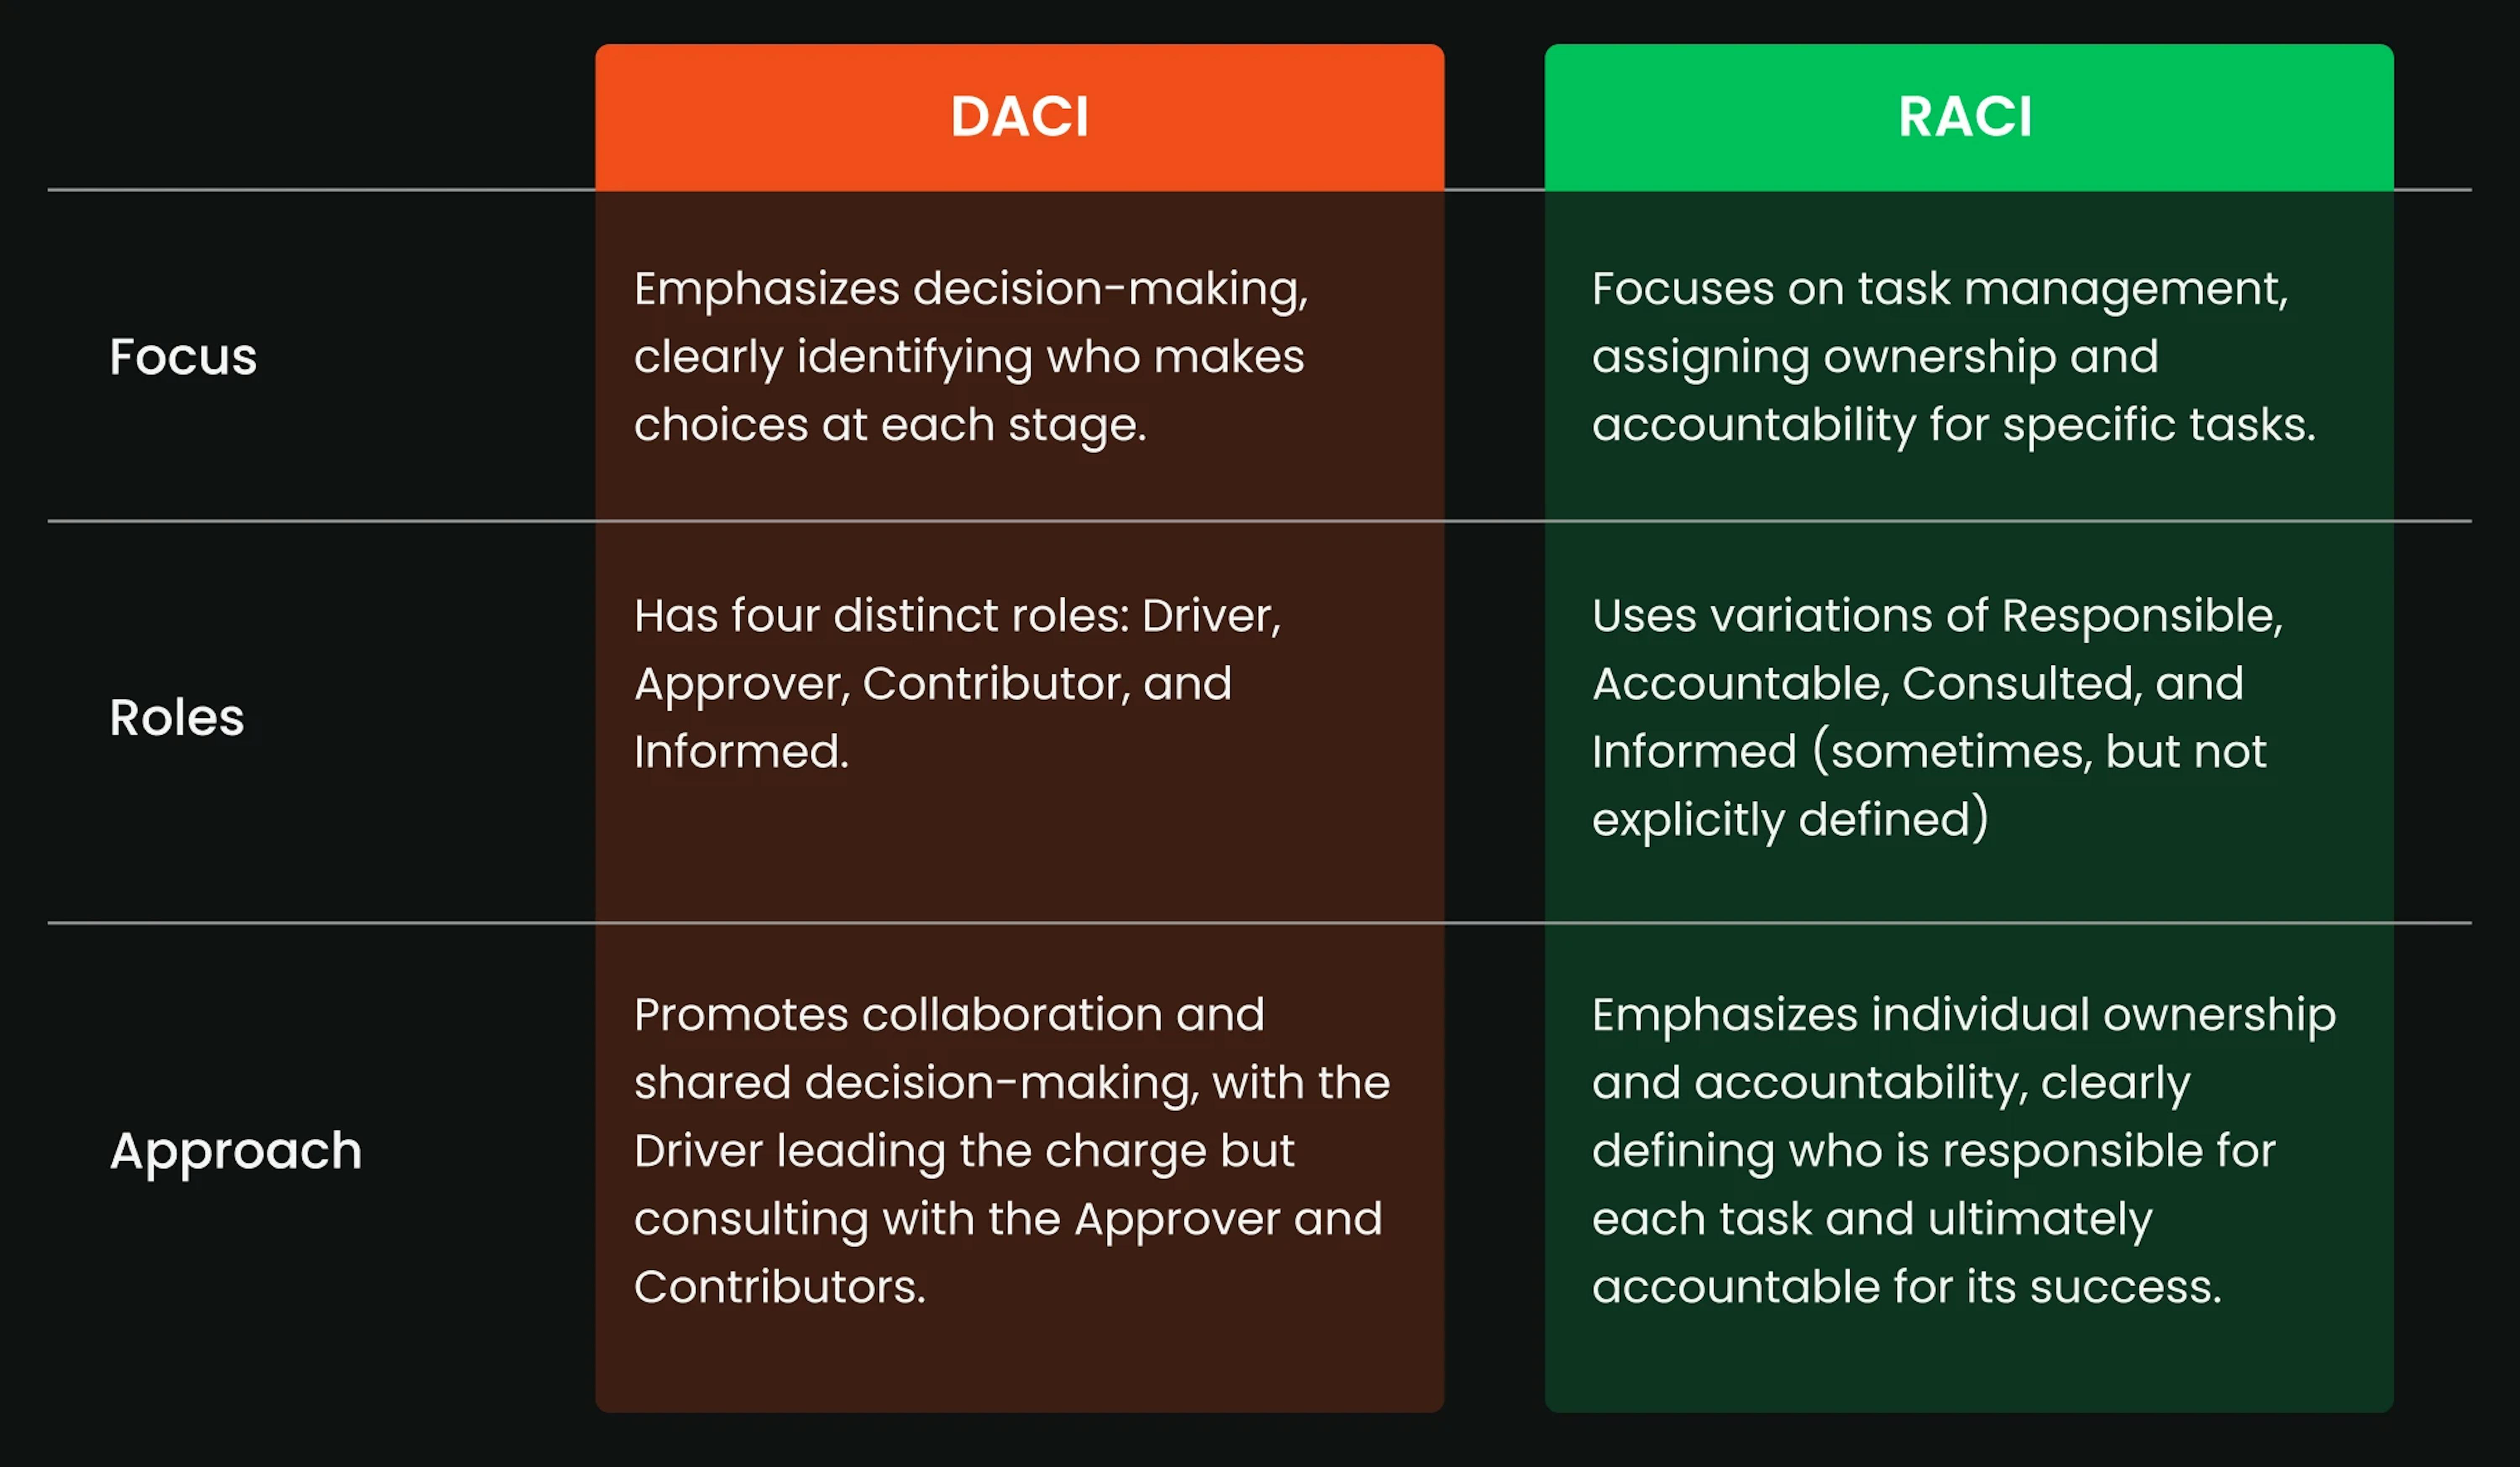 The difference between RACI and DACI